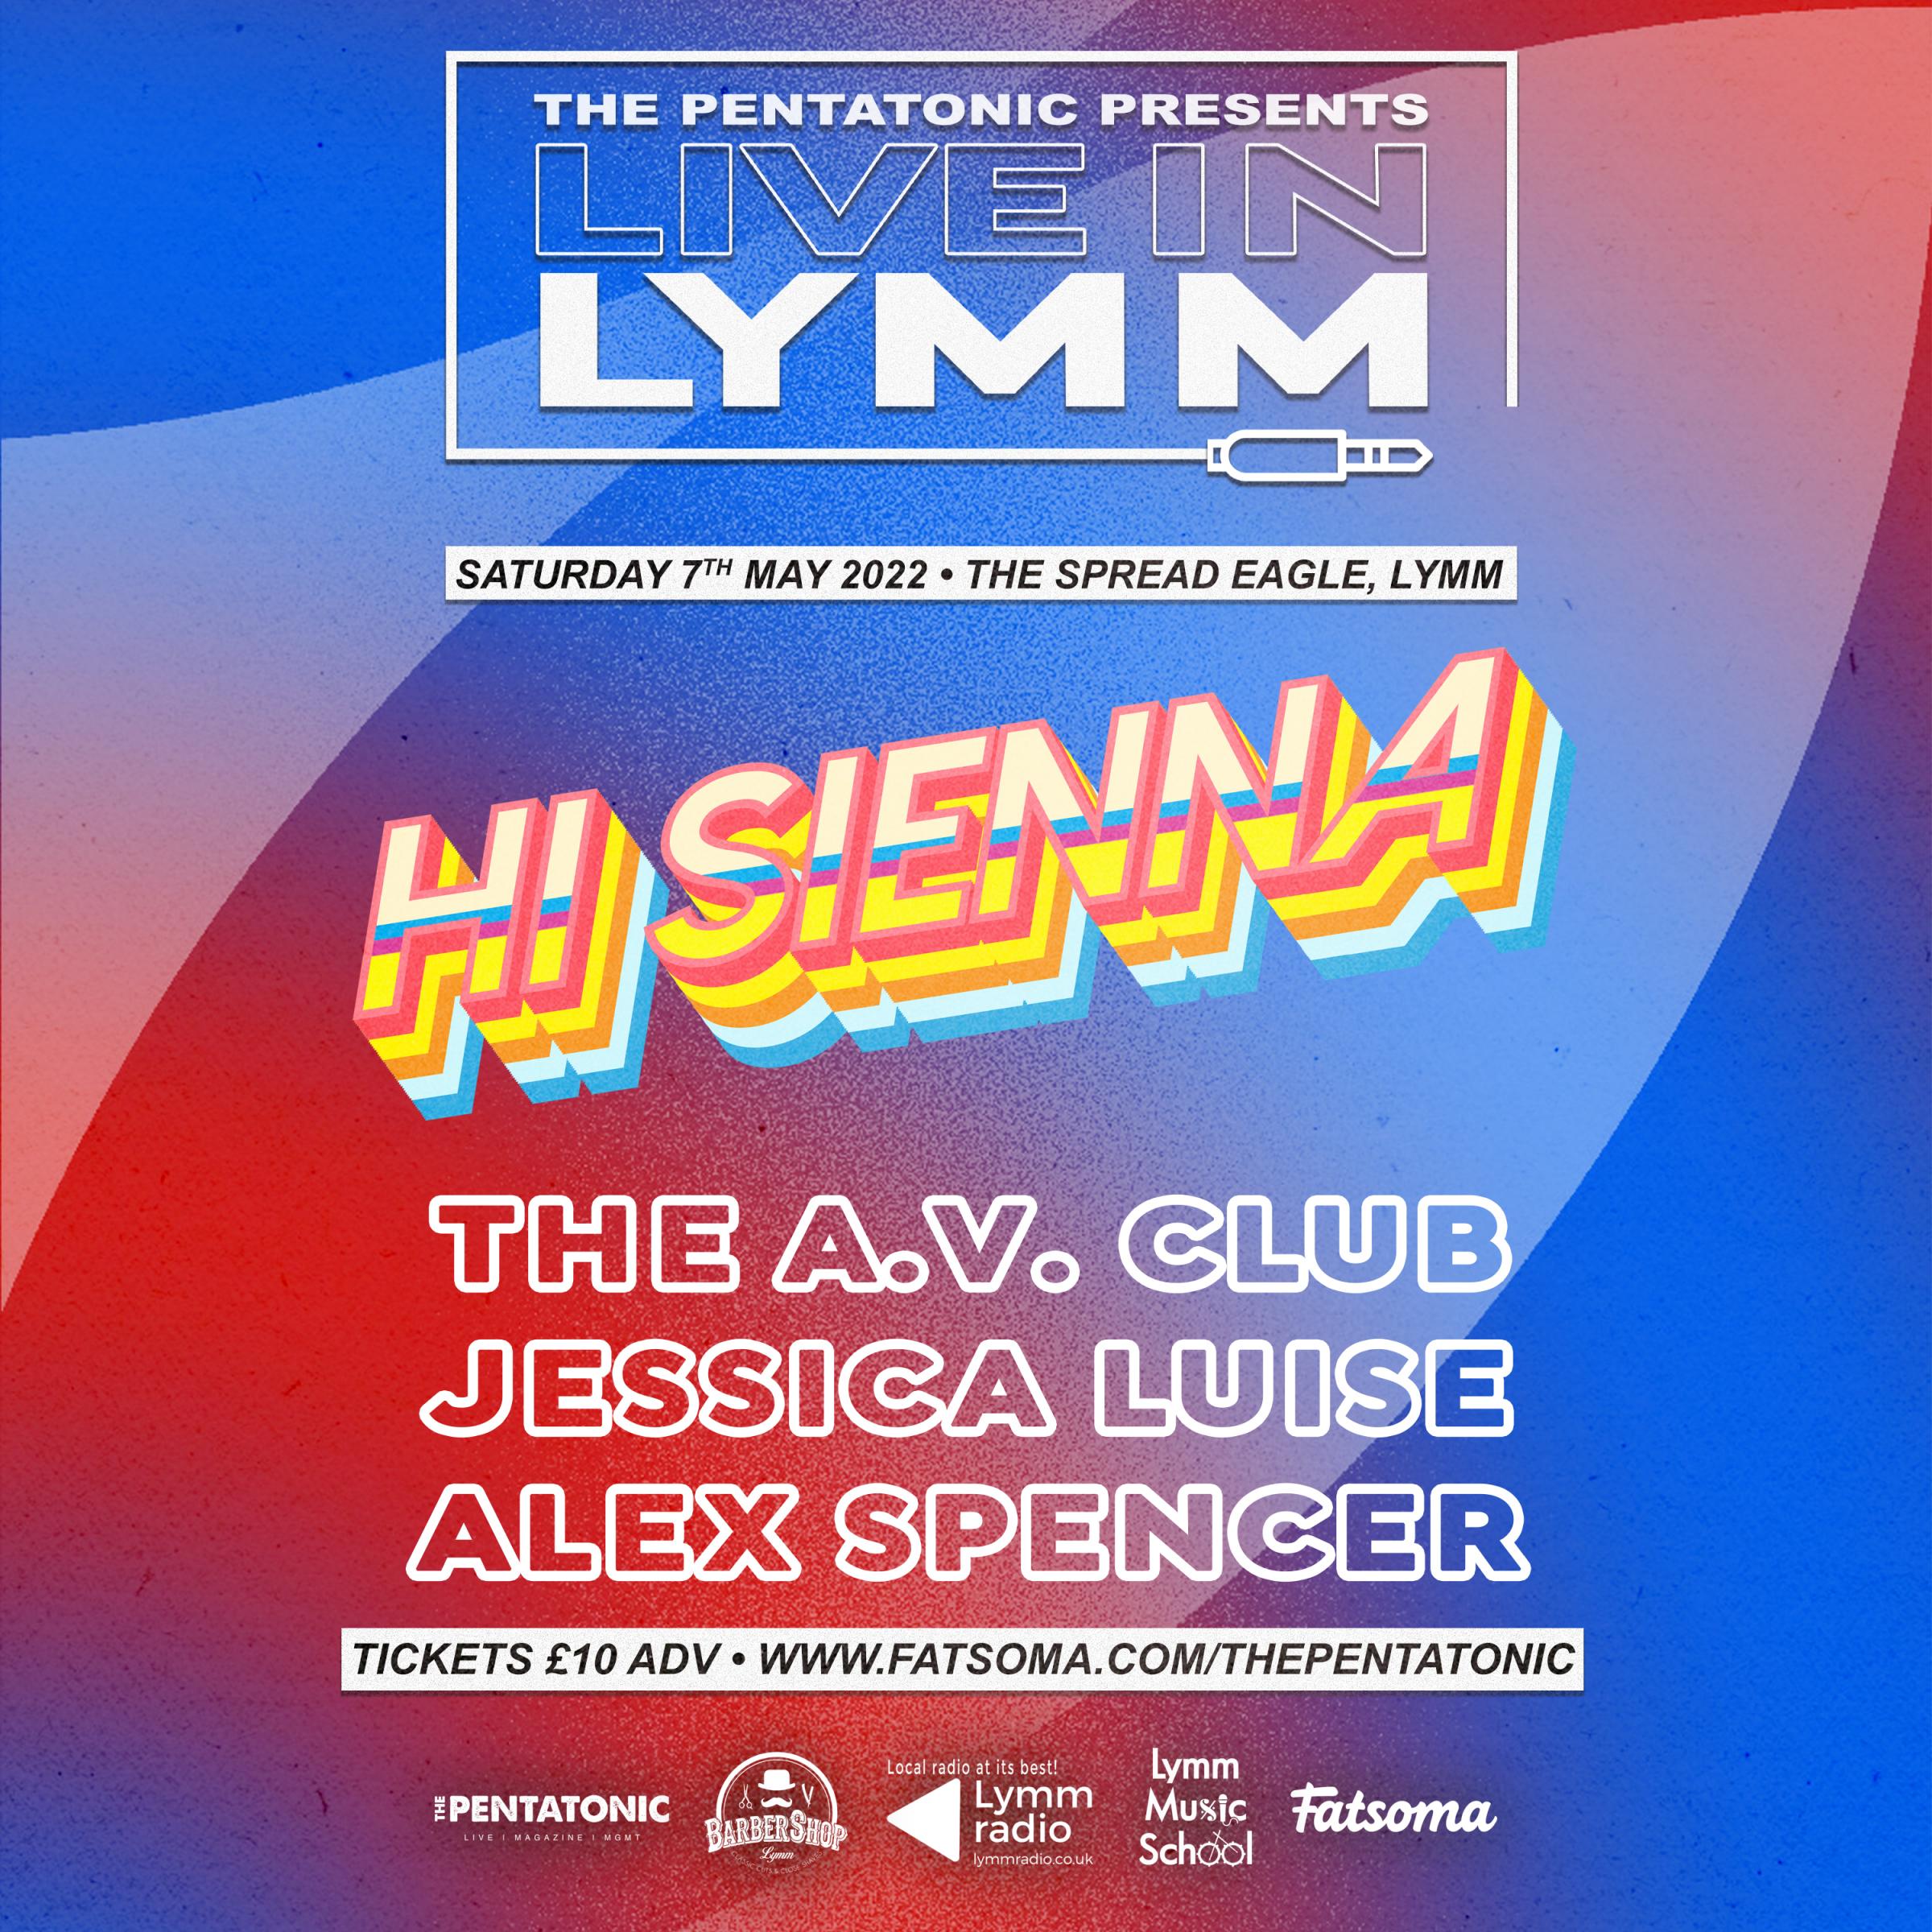 The line-up for Live in Lymm